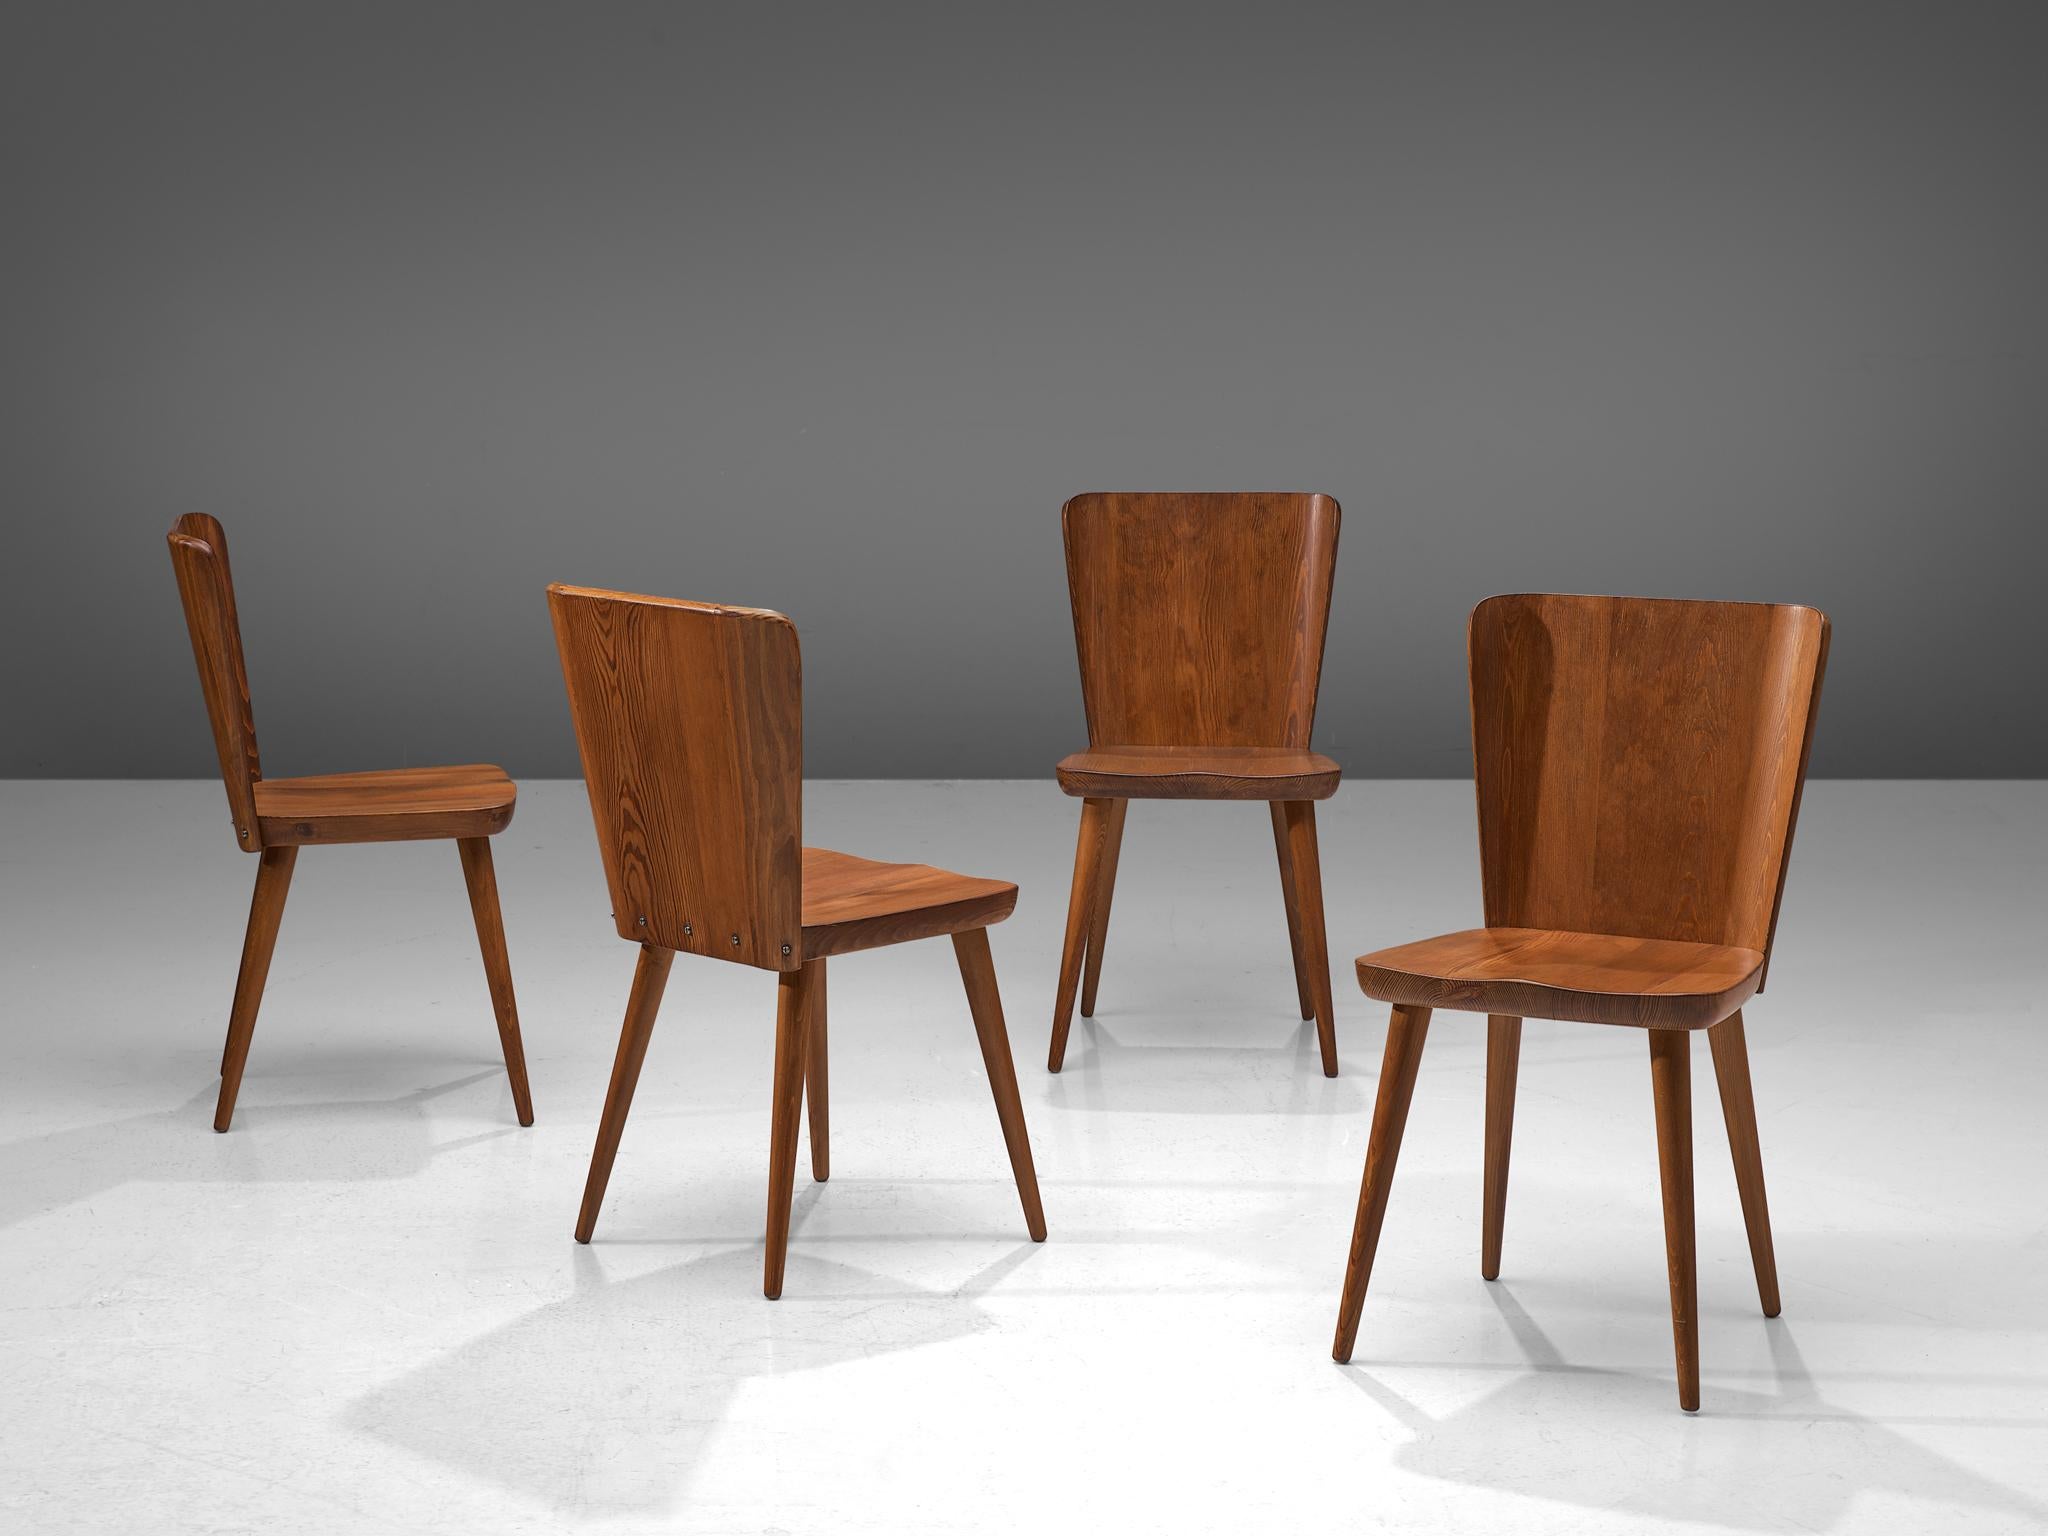 Goran Malmvall for Svensk Fur, set of 4 chairs, pine, Sweden, 1940s. 

This Swedish set of dining chairs holds a strong expression with this sturdy shaped design. The backrests runs wide near the top and consists of straight and slightly curved